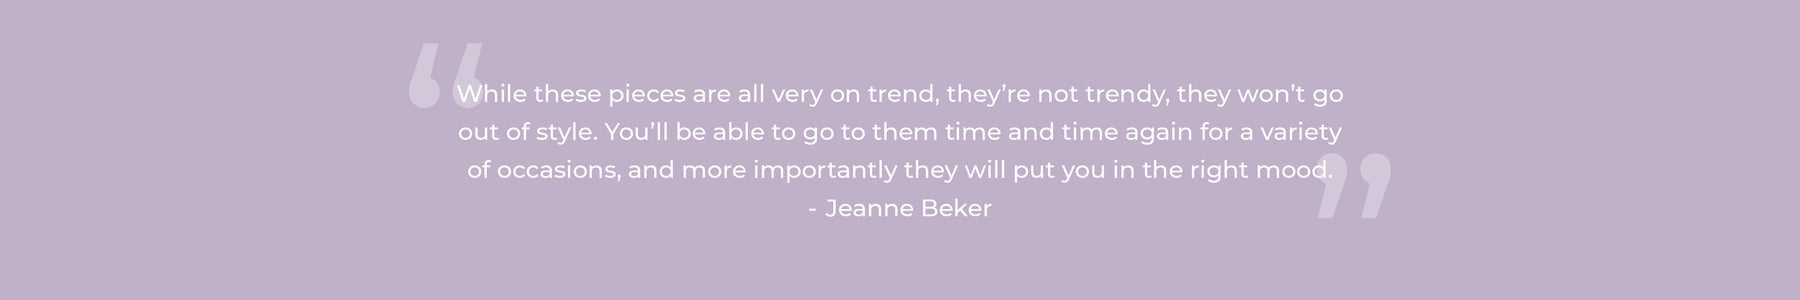 While these pieces are all very on trend, they’re not trendy, they won’t go out of style. You’ll be able to go to them time and time again for a variety of occasions, and more importantly they will put you in the right mood. Jeanne Beker